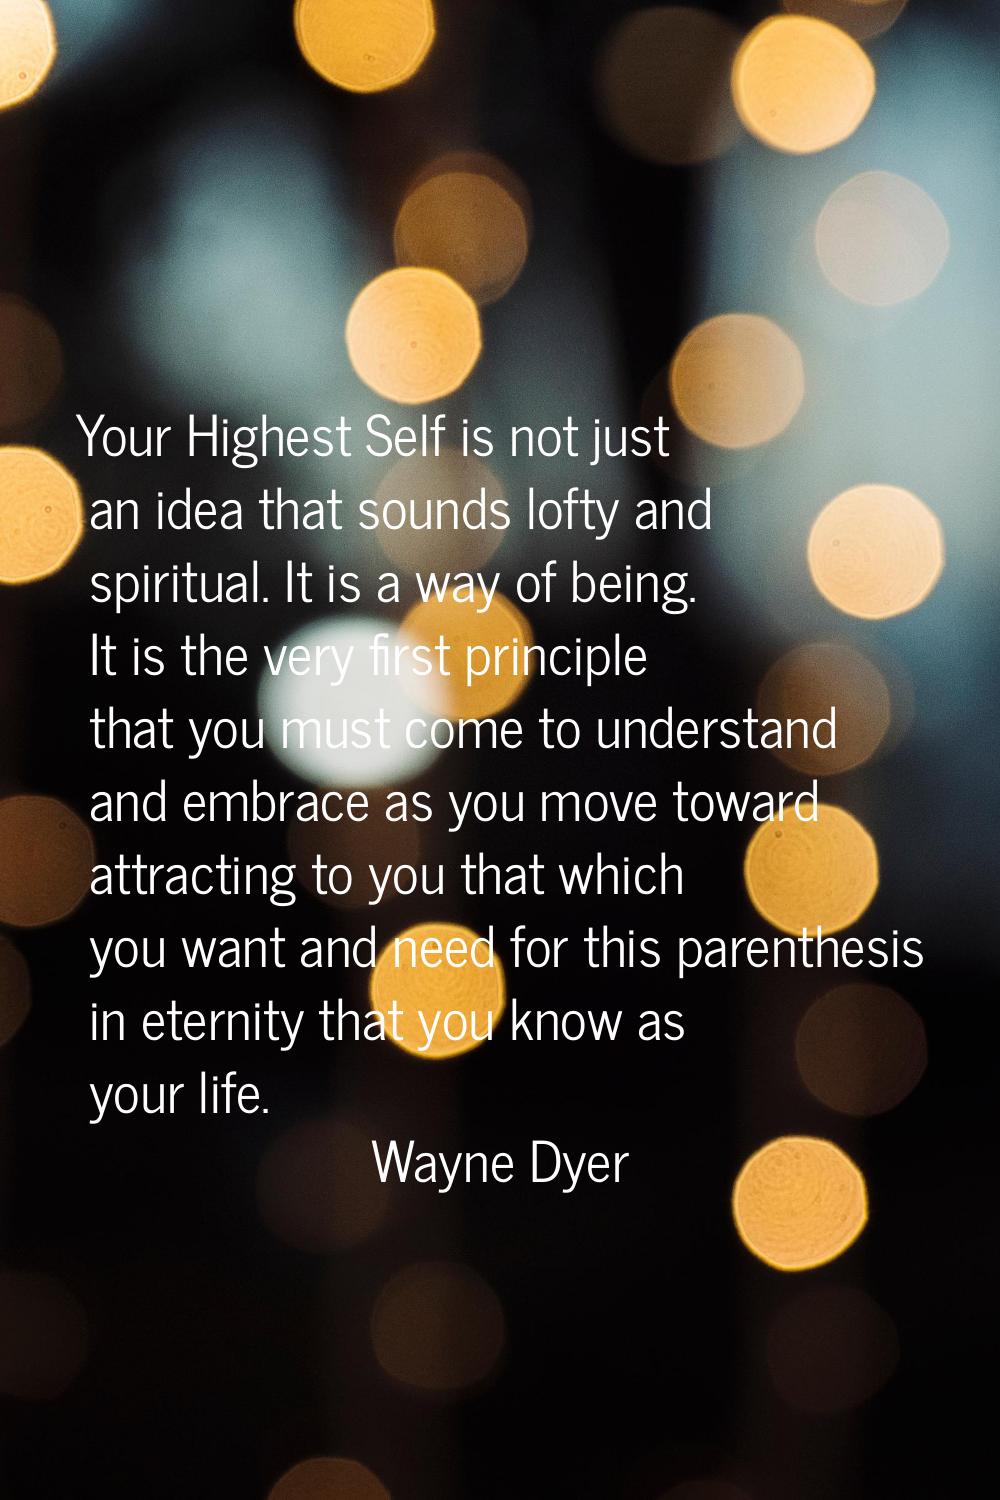 Your Highest Self is not just an idea that sounds lofty and spiritual. It is a way of being. It is 